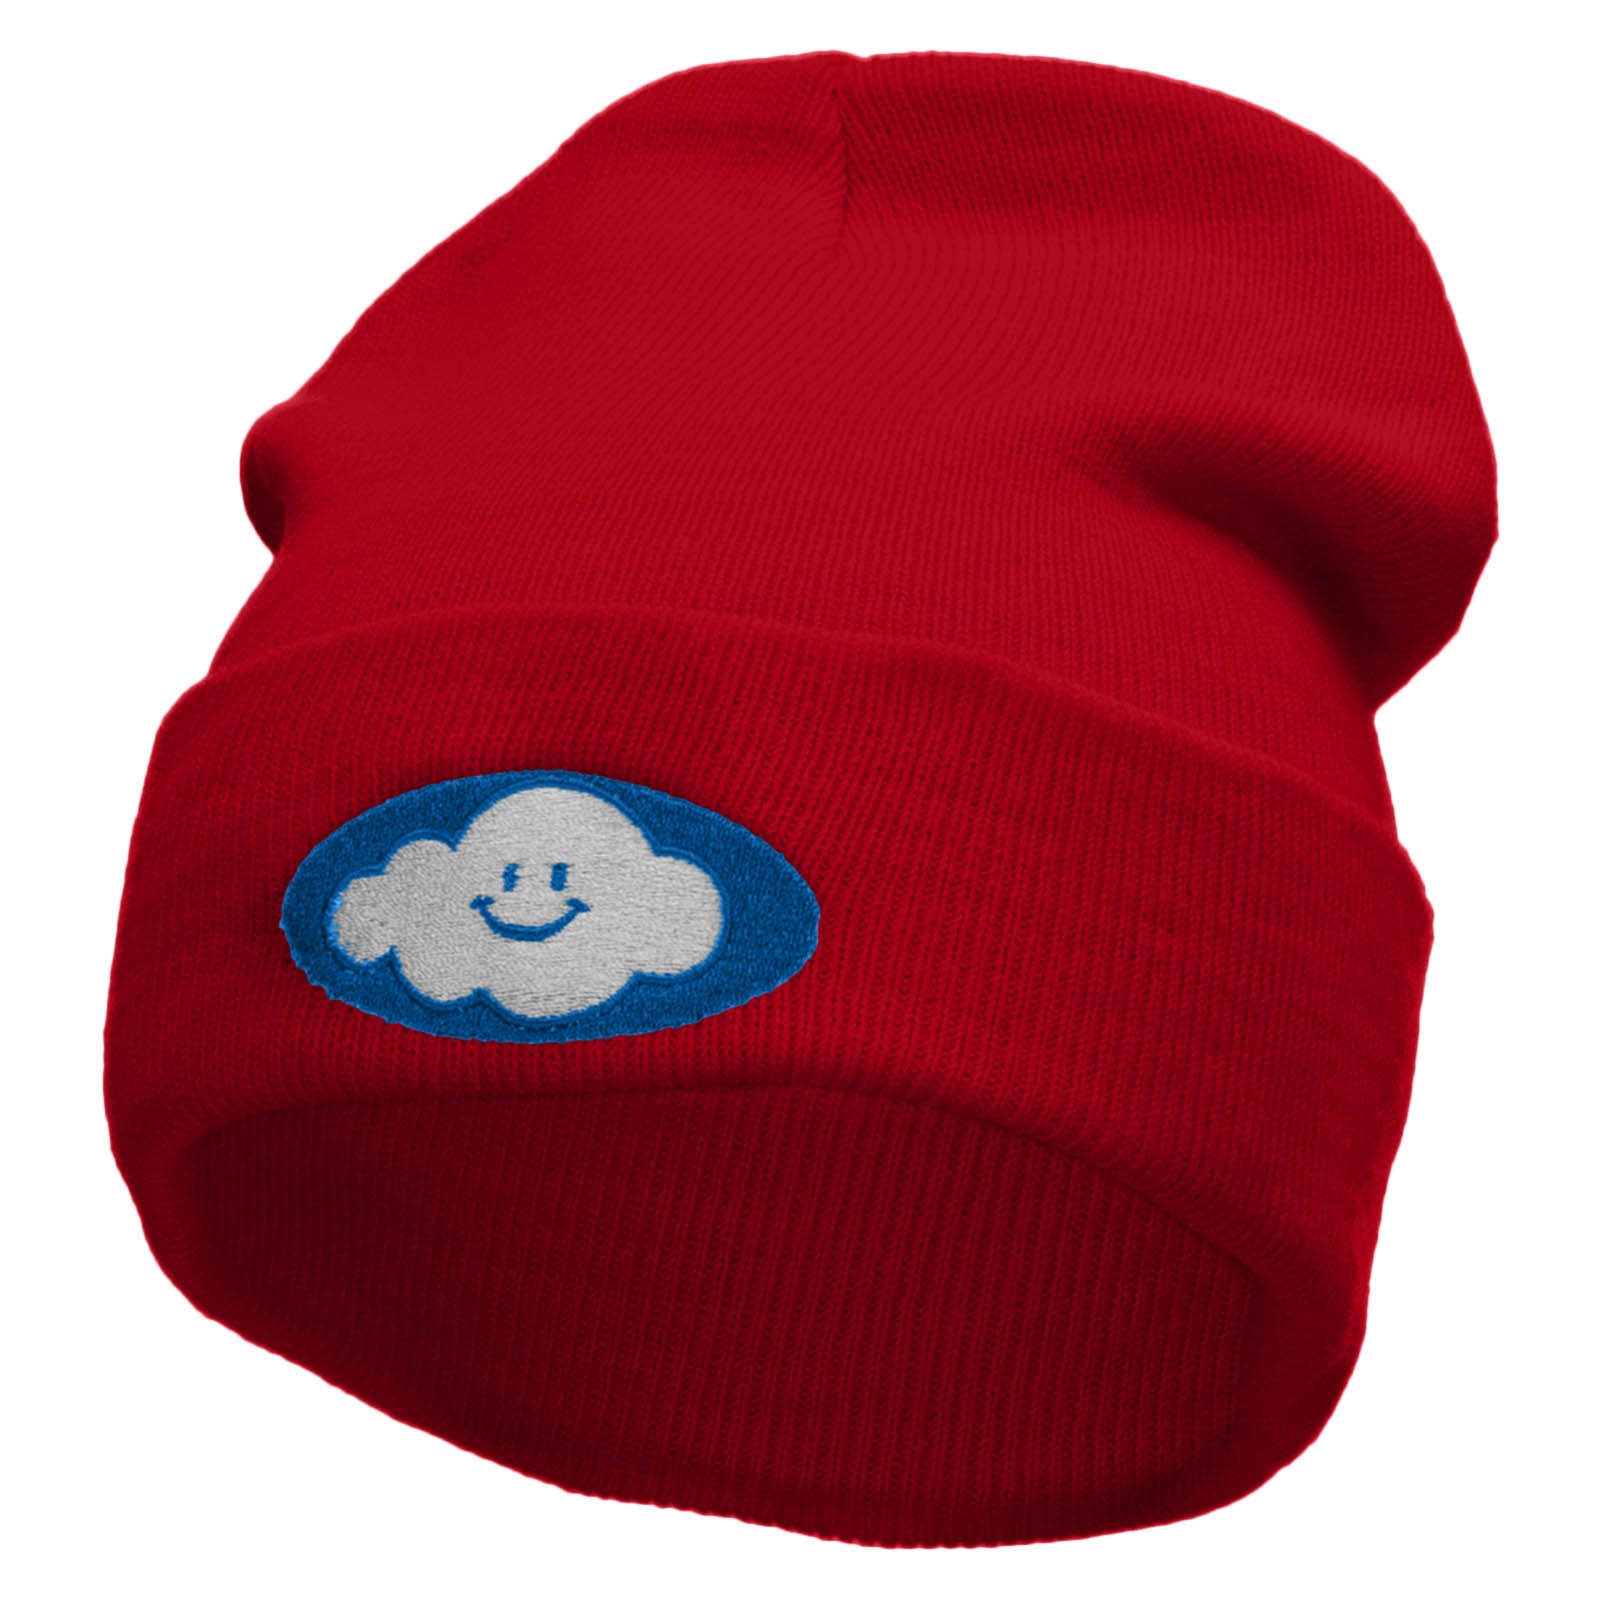 Smile Cloud Embroidered 12 Inch Long Knitted Beanie - Red OSFM